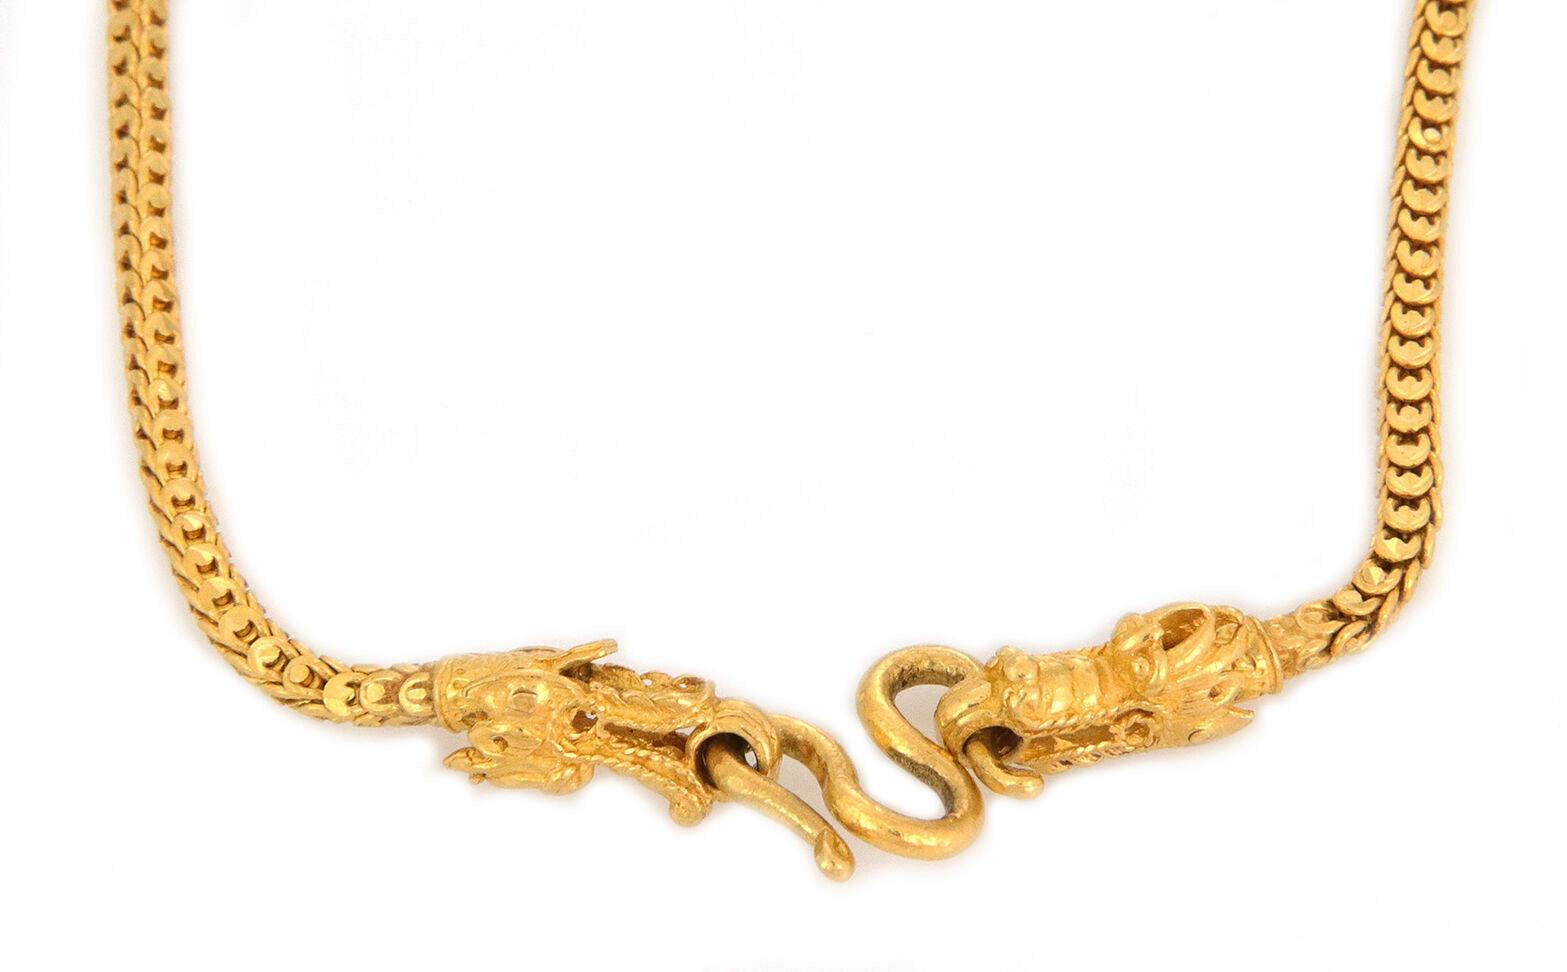 This is an impressive dragon necklace; it is crafted from 24k gold featuring a box shape dragon scale link 3mm thick chain. On one end of the chain has a detailed sculpted dragon head with a ring in its mouth, the other end of the chain has another